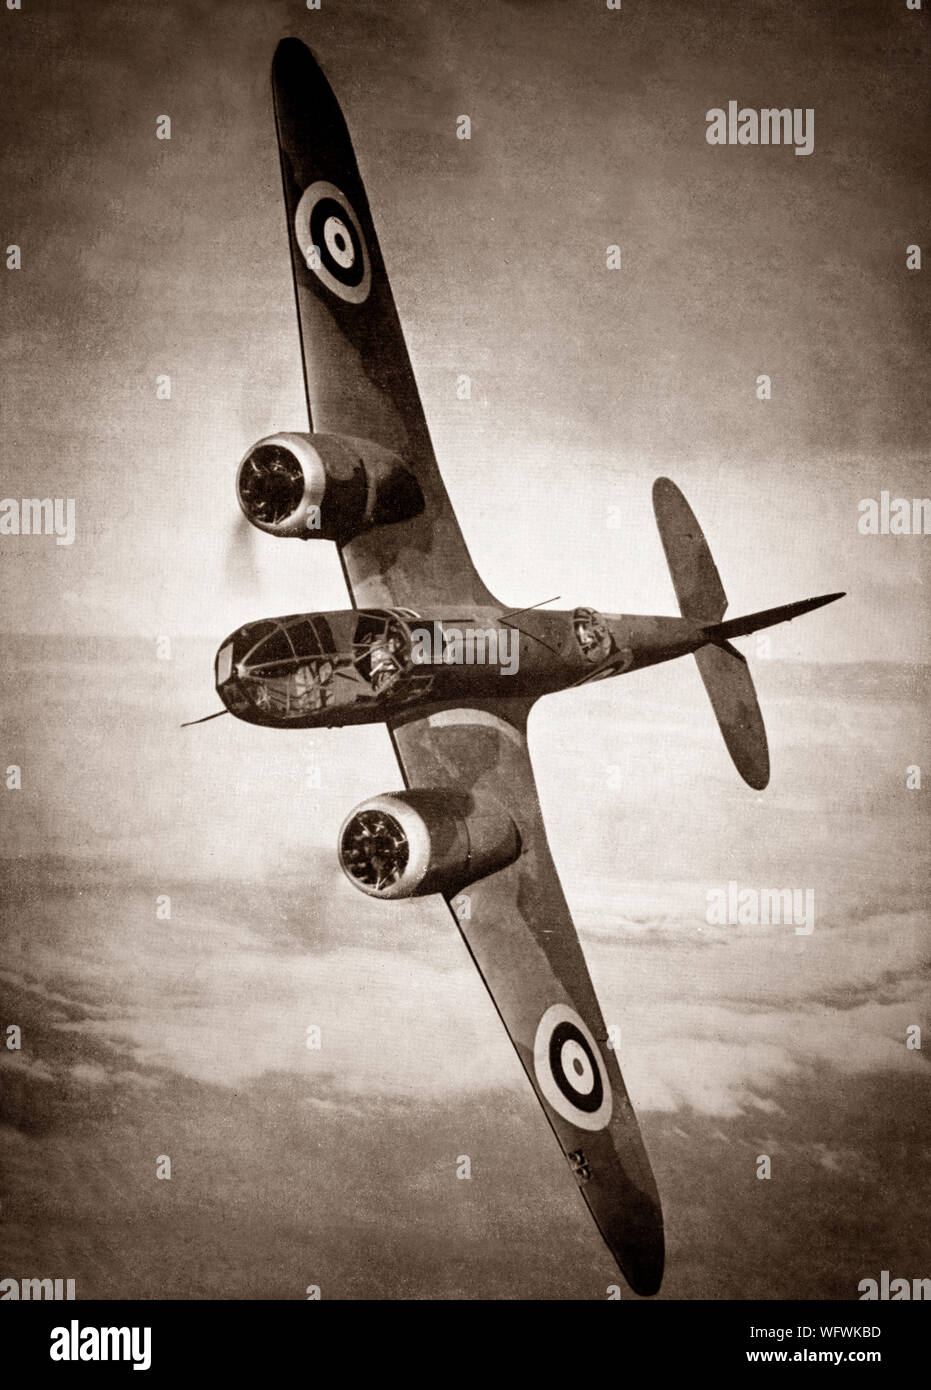 A Bristol Blenheim in flight. The British light bomber aircraft designed and built by the Bristol Aeroplane Company was used extensively in the first two years and in some cases throughout the Second World War.  It was one of the first British aircraft with an all-metal stressed-skin construction, retractable landing gear, flaps, a powered gun turret and variable-pitch propellers.It was faster than most fighters in the late 1930s but the development of monoplane fighters made it more vulnerable particularly if flown in daylight, though it proved successful as a night fighter. Stock Photo